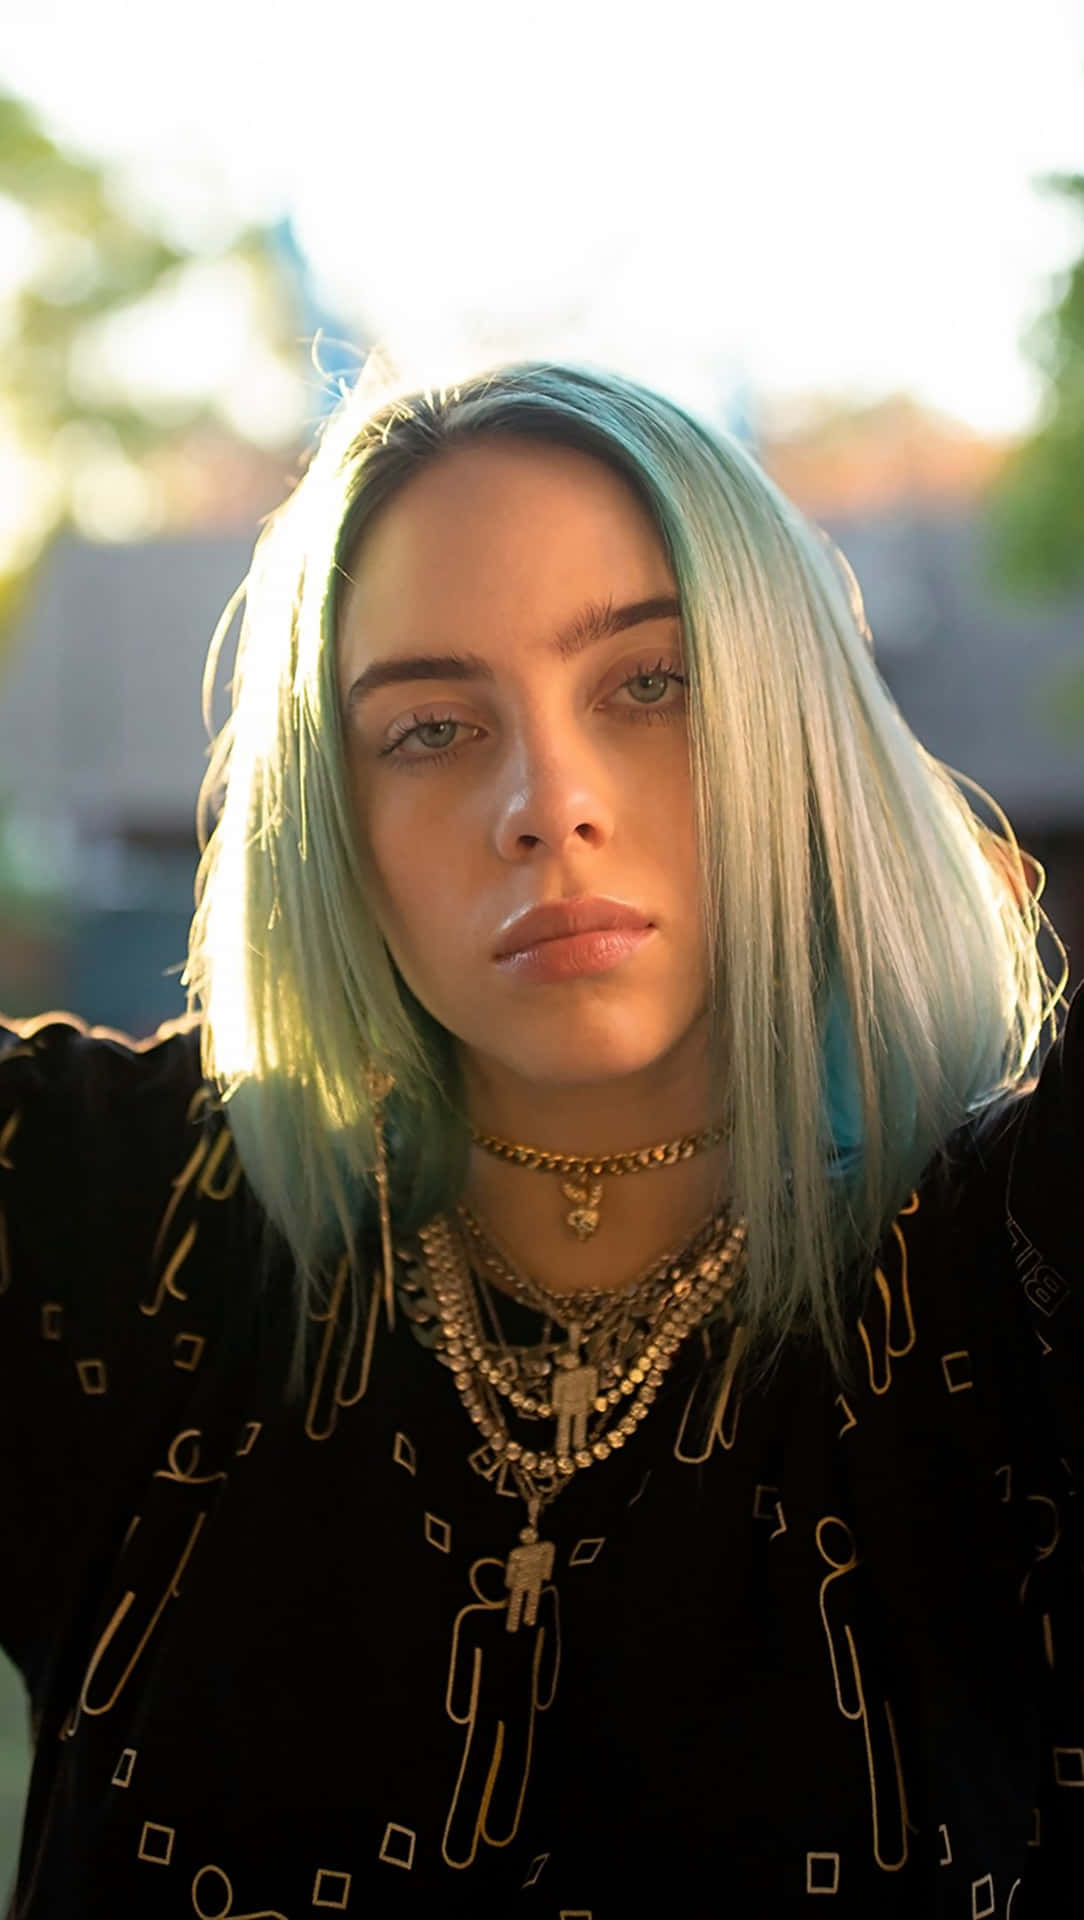 Billie Eilish looking cool and confident